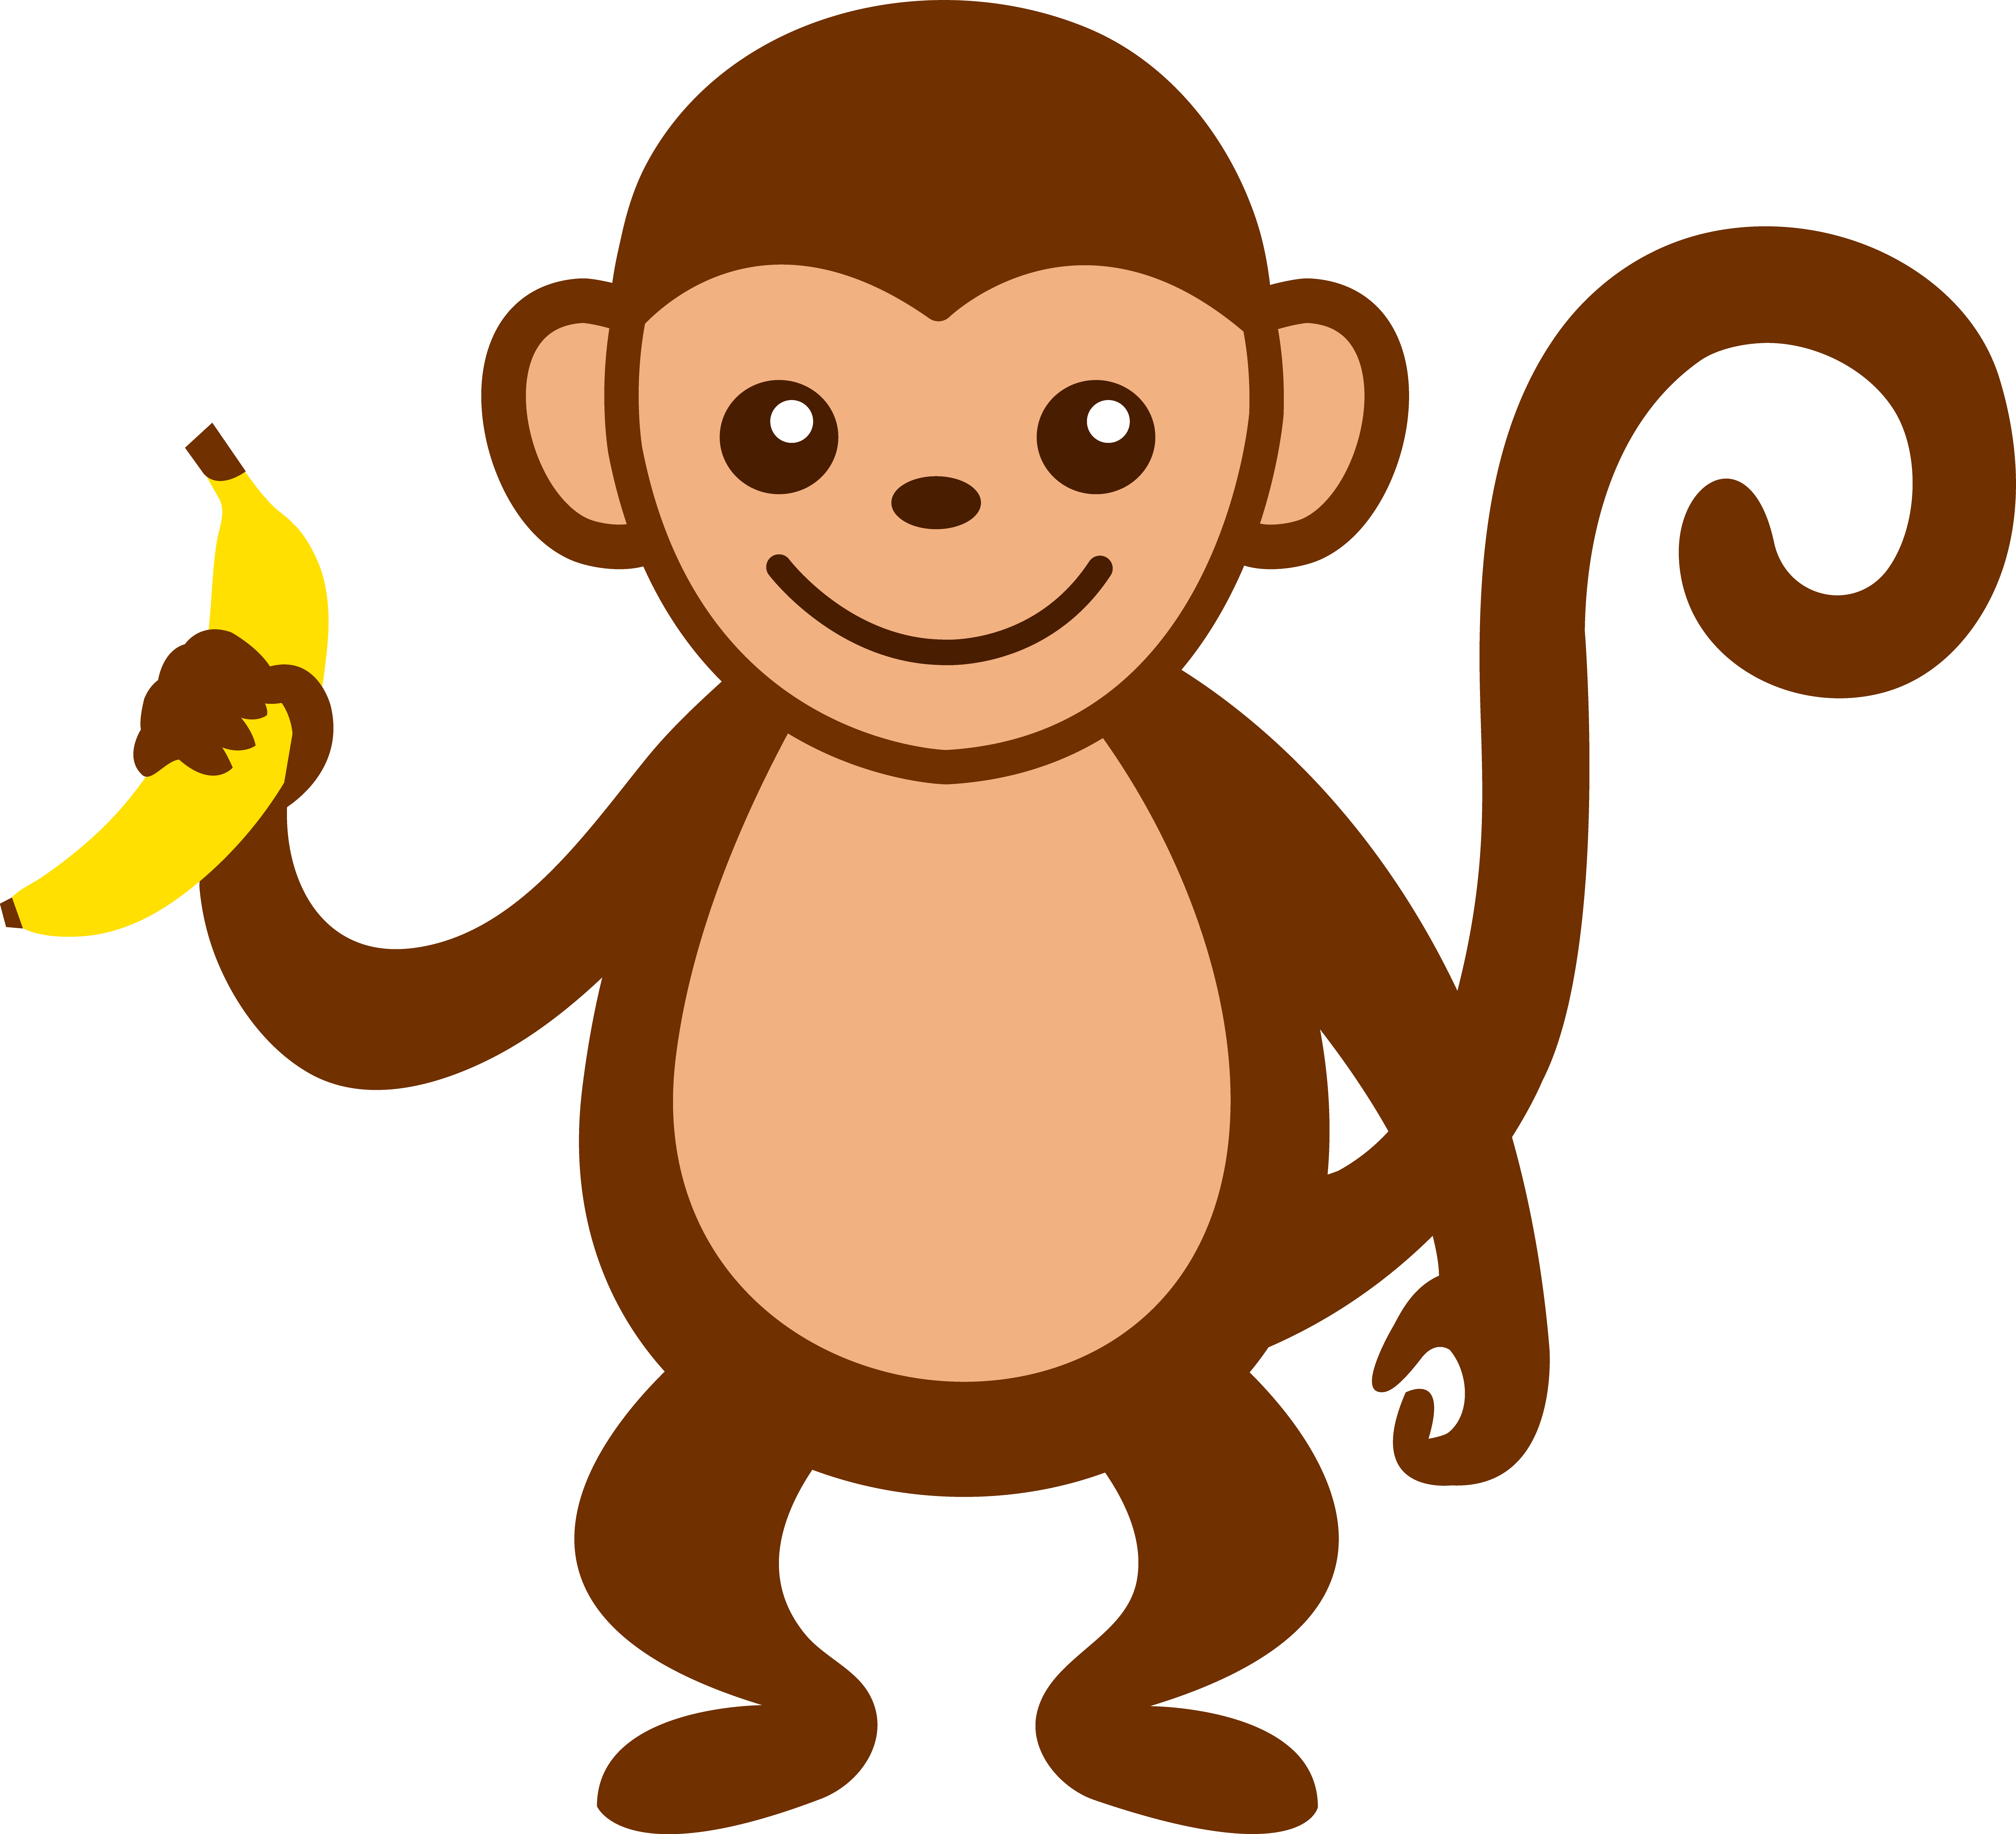 Sweet_the_monkey.png